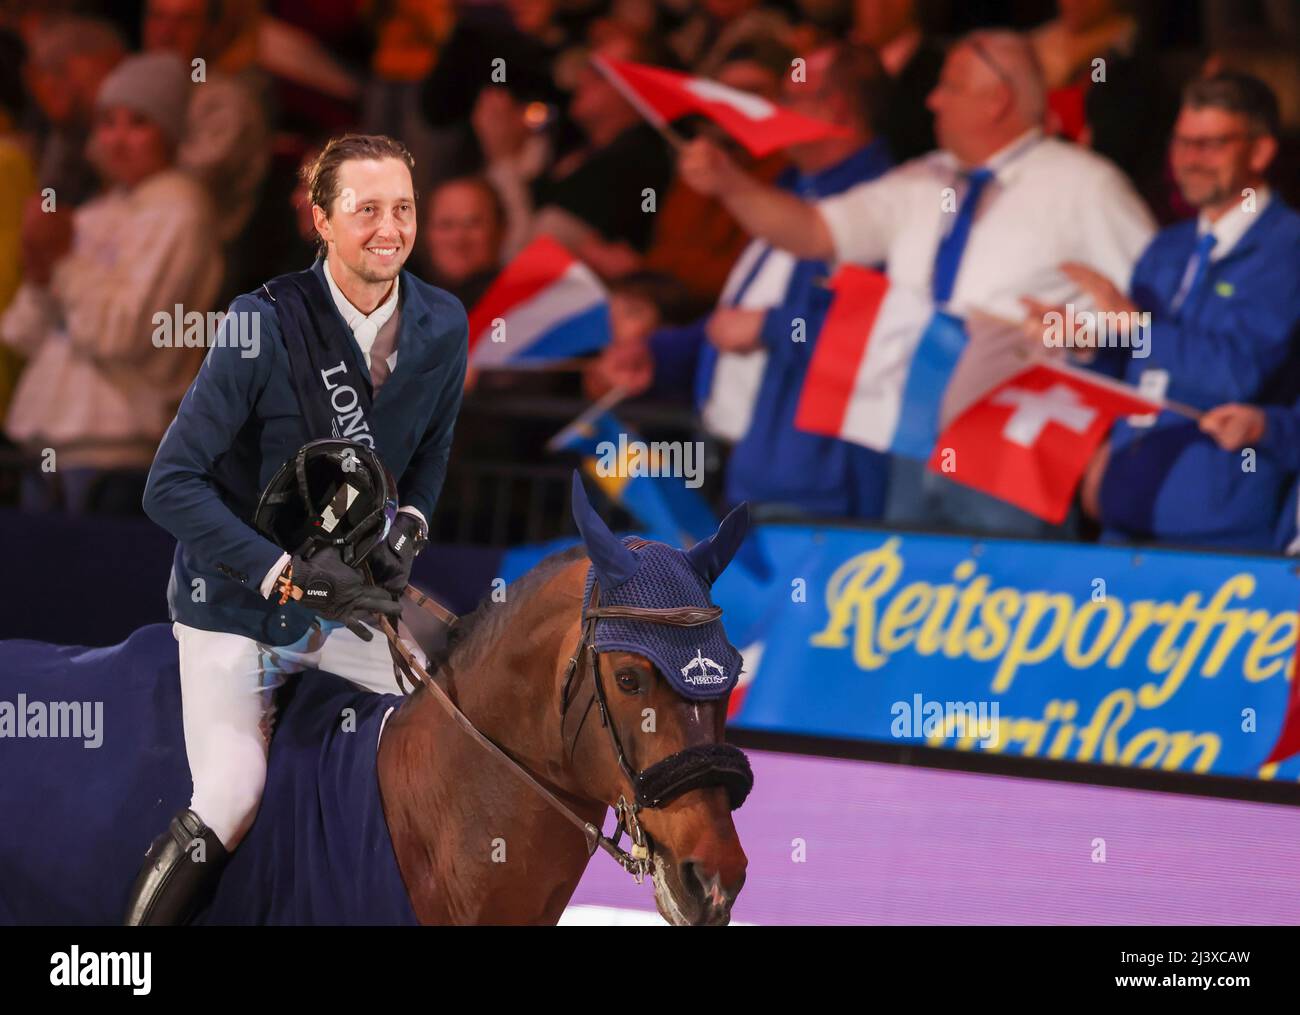 Leipzig, Germany. 10th Apr, 2022. Martin Fuchs of Switzerland rides a lap of honor after his victory on Chaplin during the final of the Longines Fei Jumping World Cup at the Leipzig Fair. Credit: Jan Woitas/dpa/Alamy Live News Stock Photo